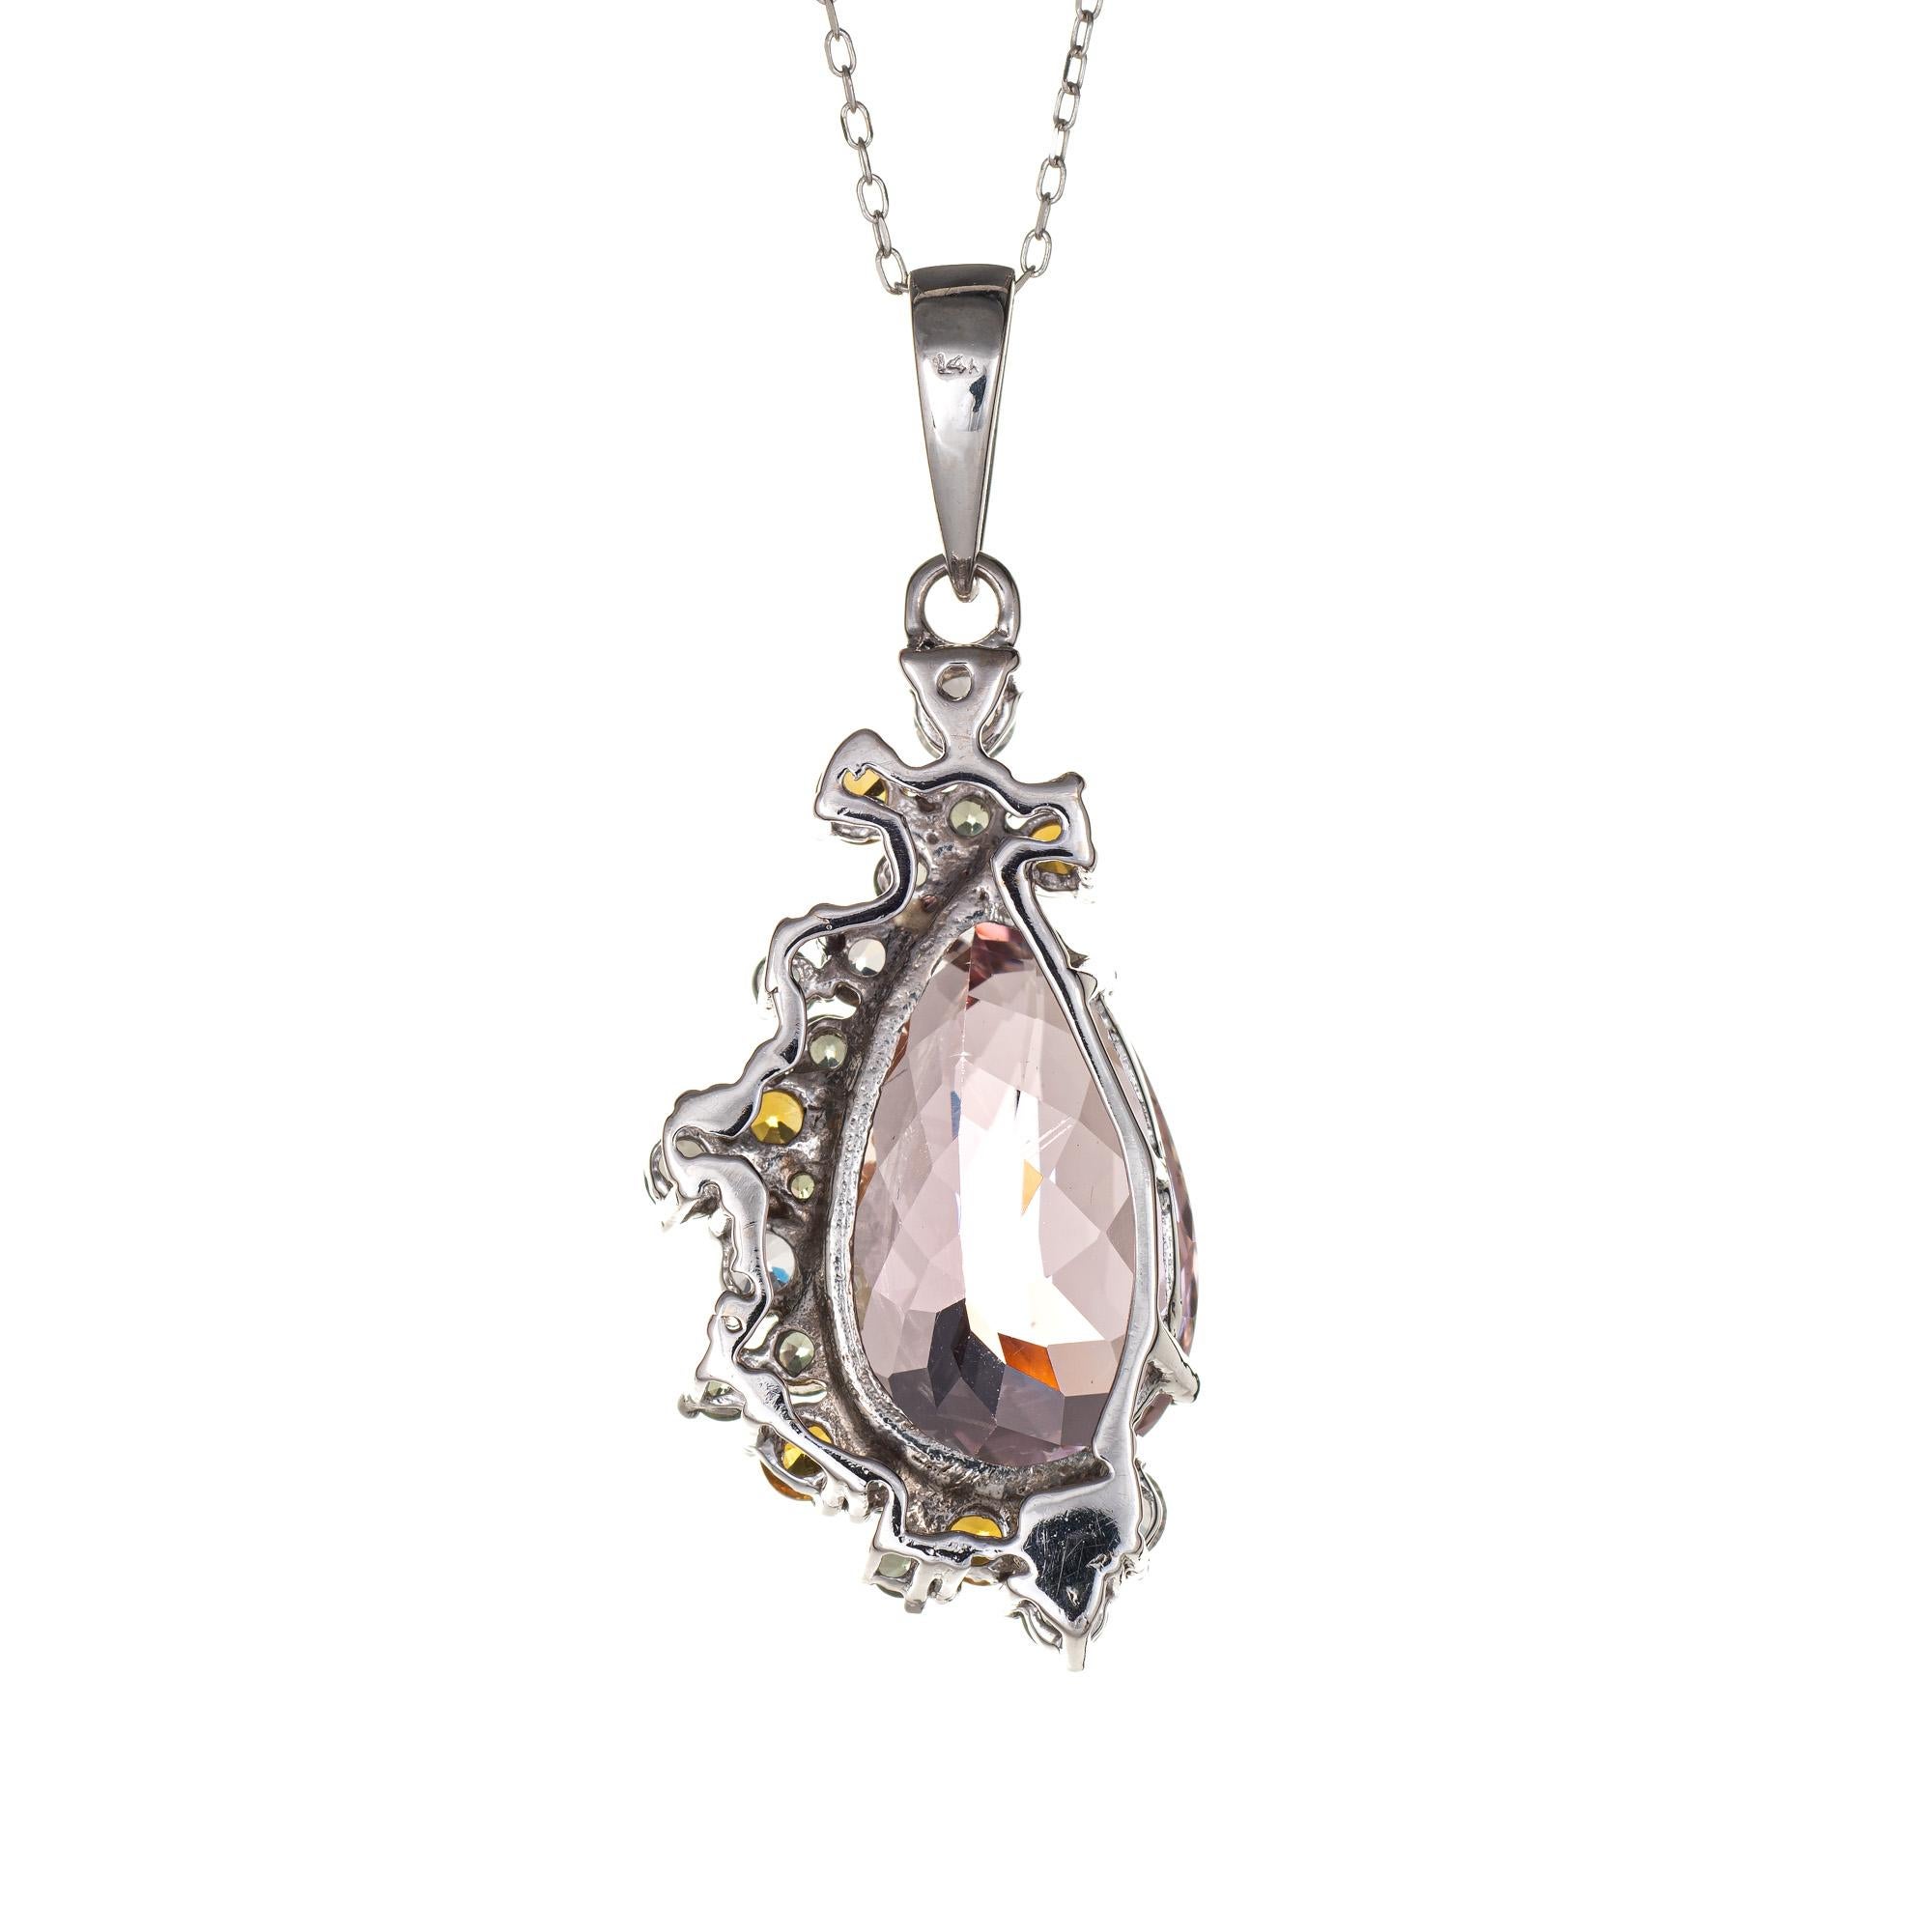 Finely detailed morganite & multi gemstone necklace crafted in 14 karat white gold. 

Pear cut faceted morganite measures 20mm x 12mm (estimated at 11 carats). Citrine, prasiolite and white topaz total an estimated 2.25 carats. The stones are in